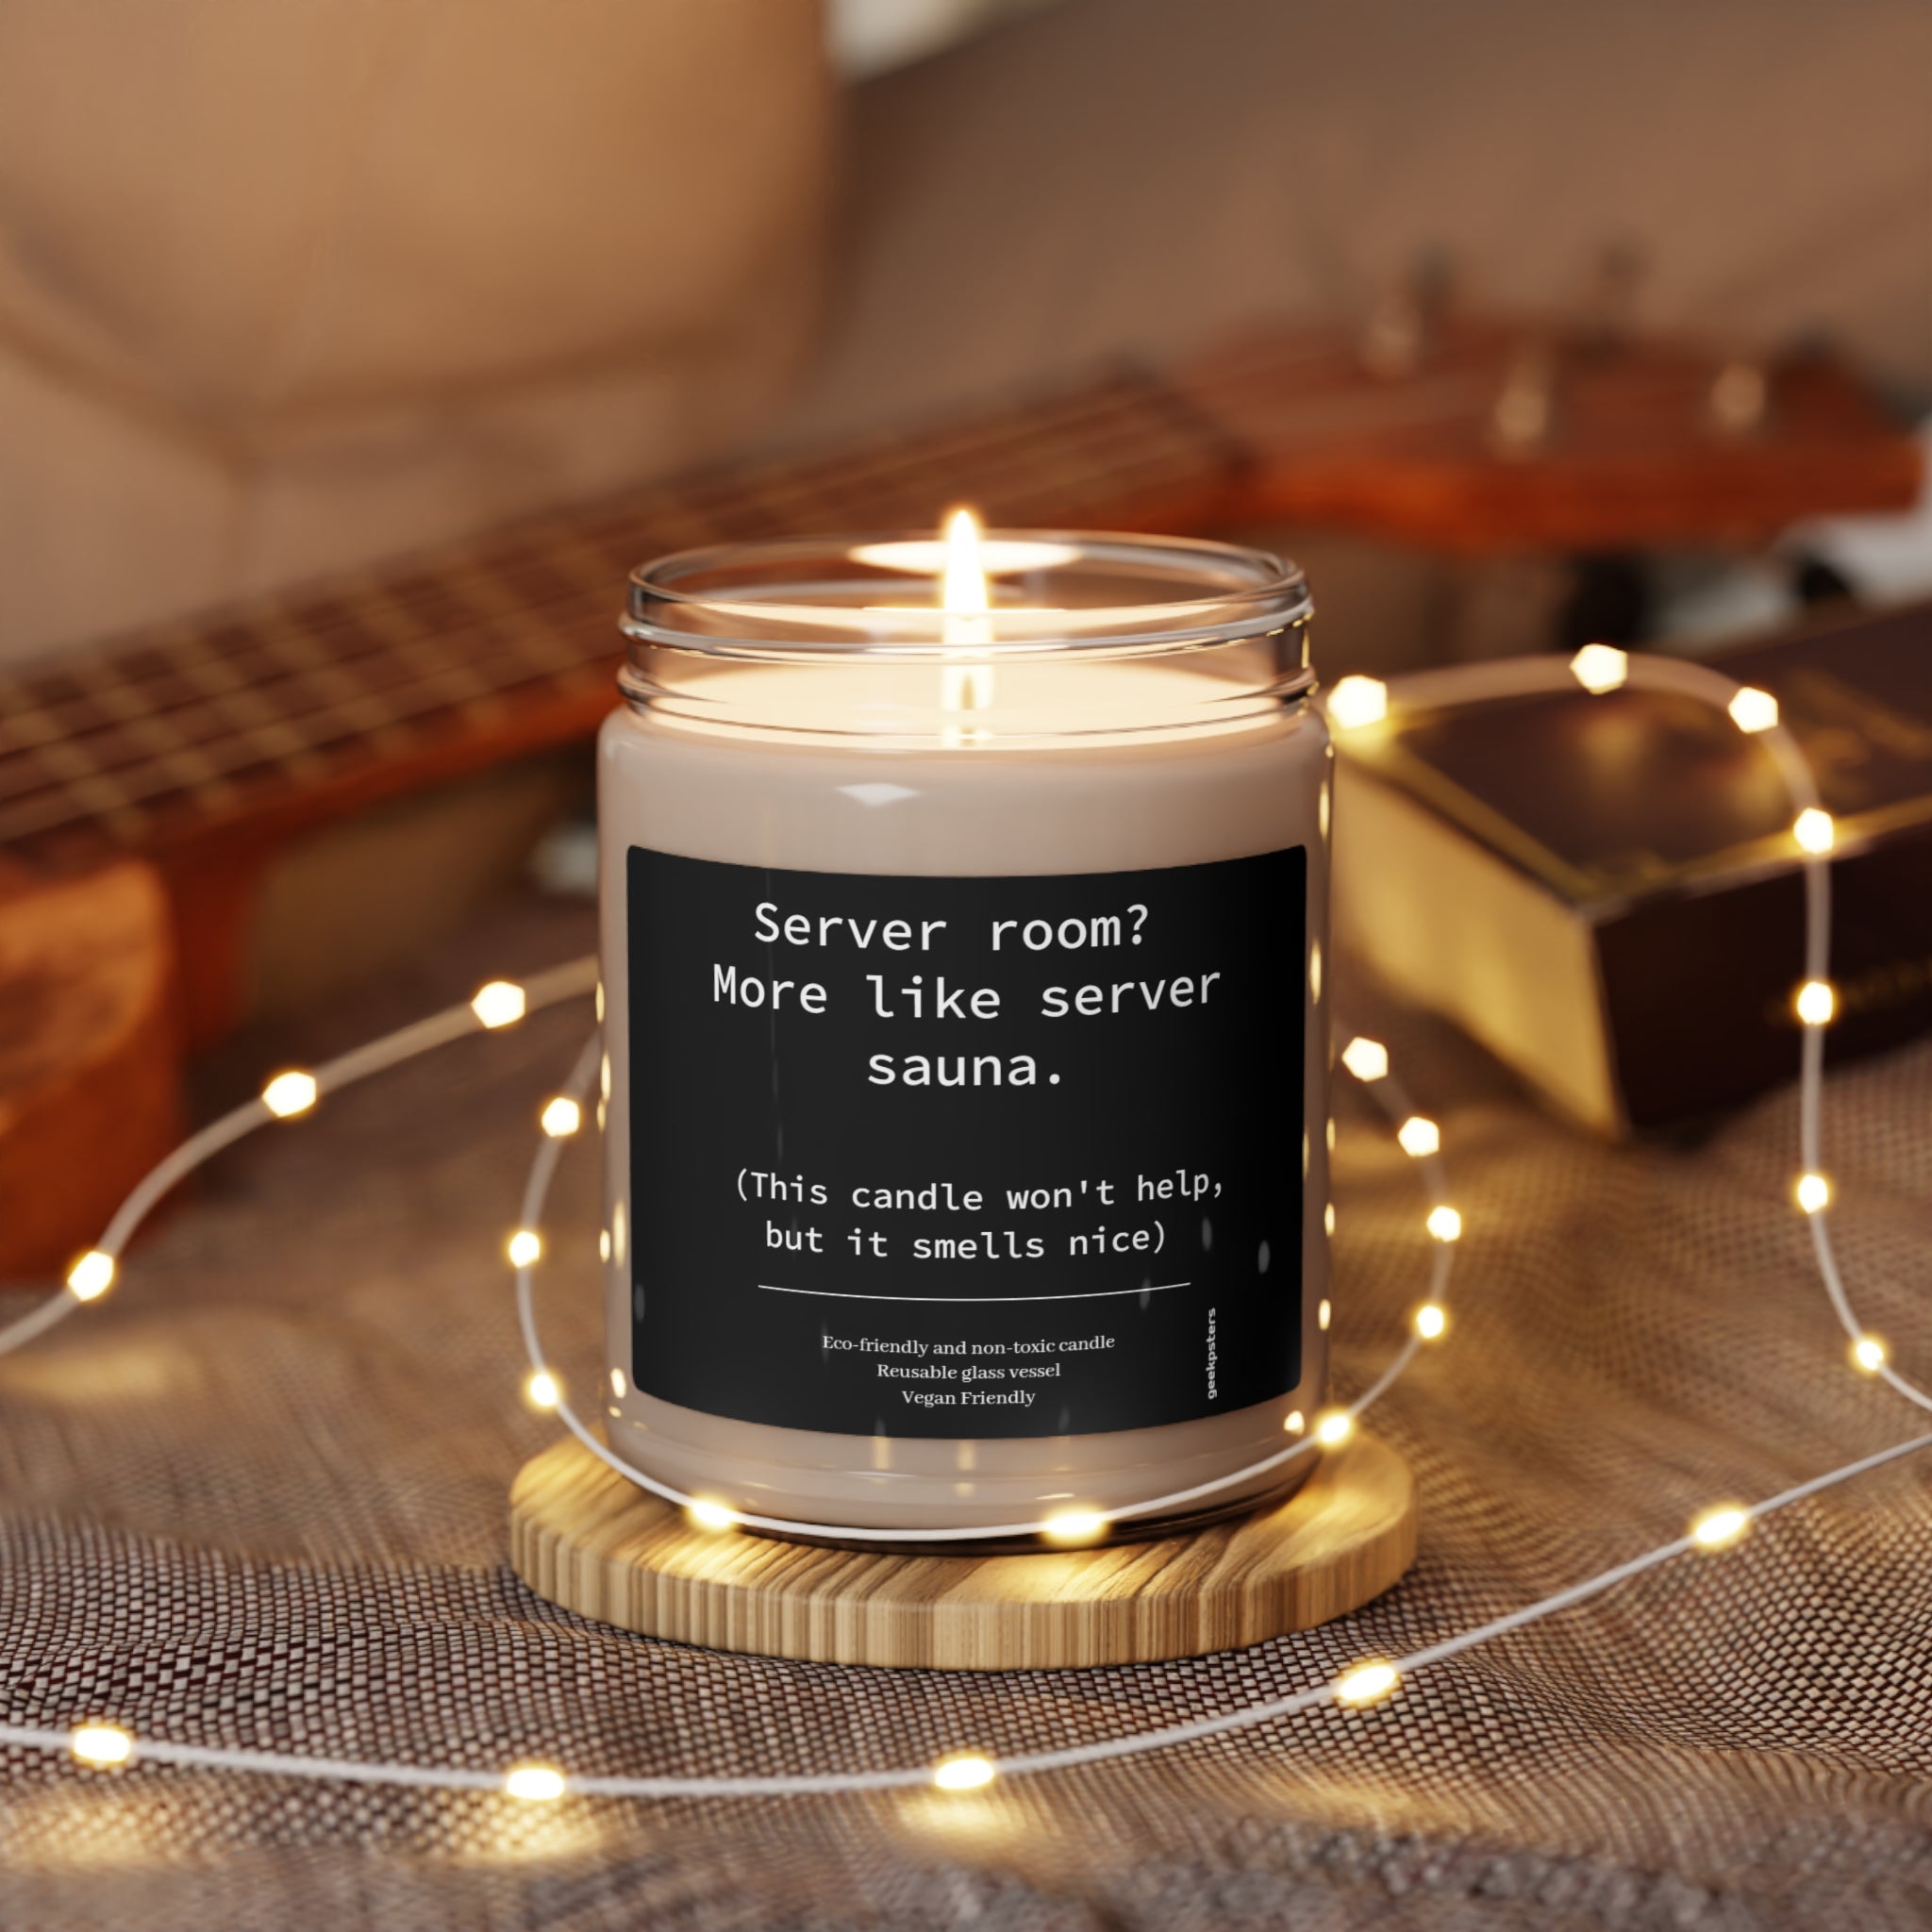 A lit Server Room? More Like Server Sauna scented candle with a humorous label on a wooden holder amidst fairy lights, featuring a natural soy wax blend.